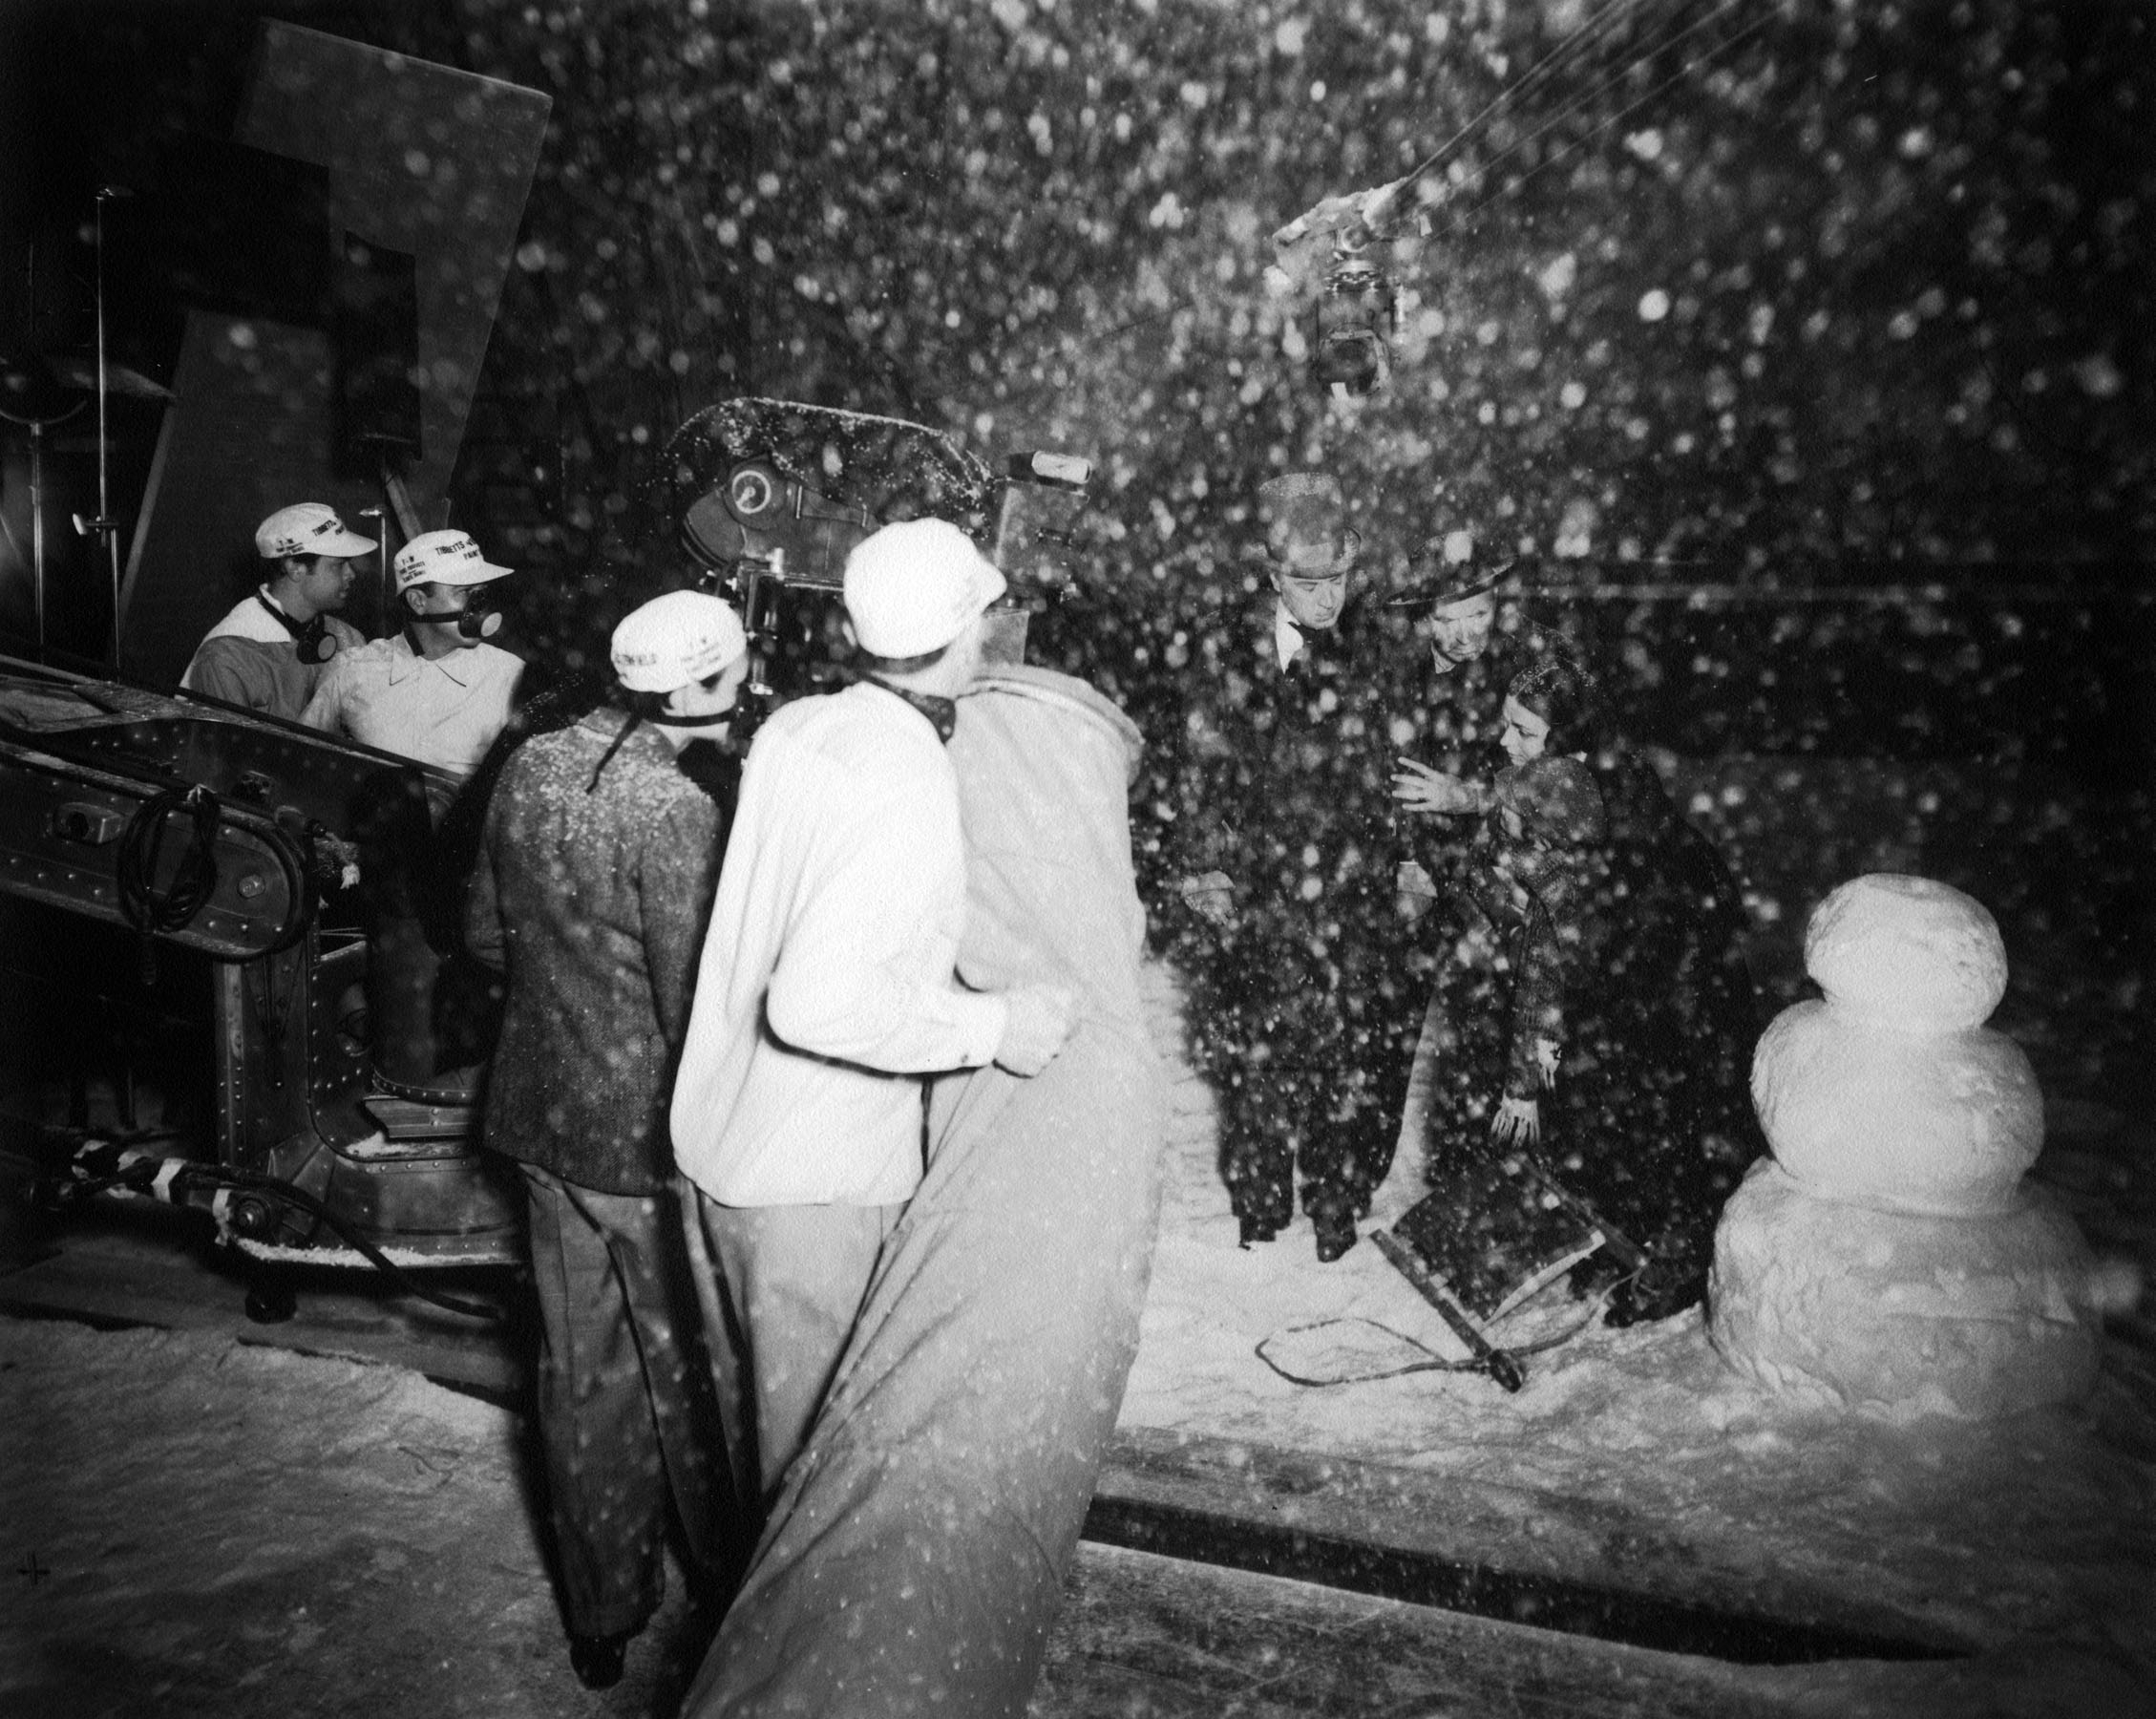 The crew wearing ventilator masks during the shooting of a snow scene.